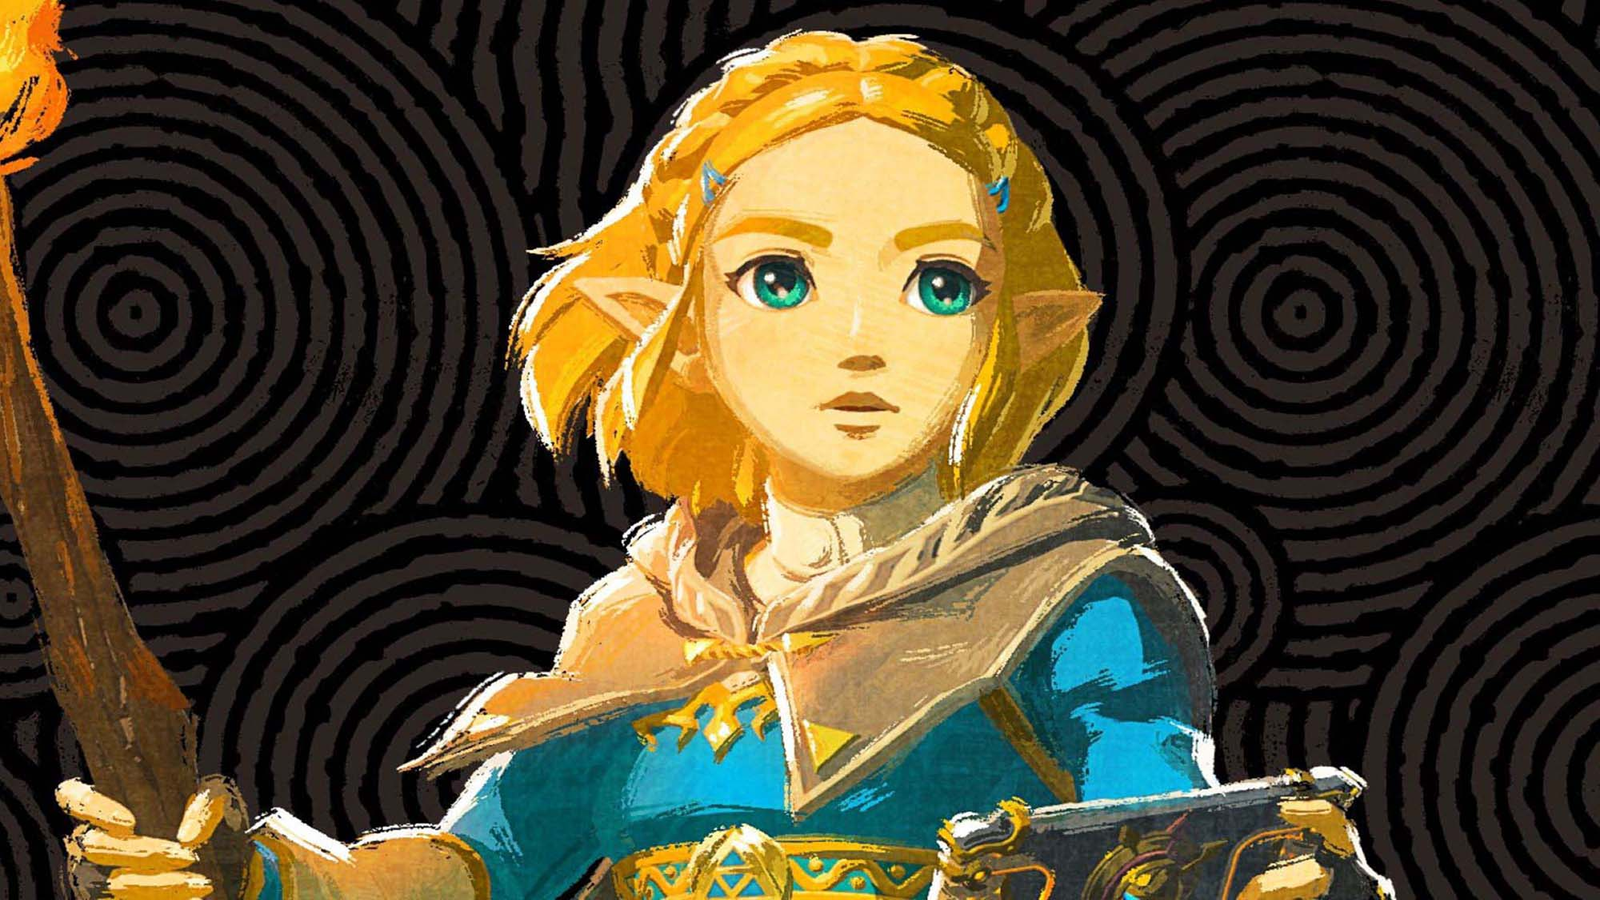 Nintendo is developing a Legend of Zelda live-action movie - Polygon